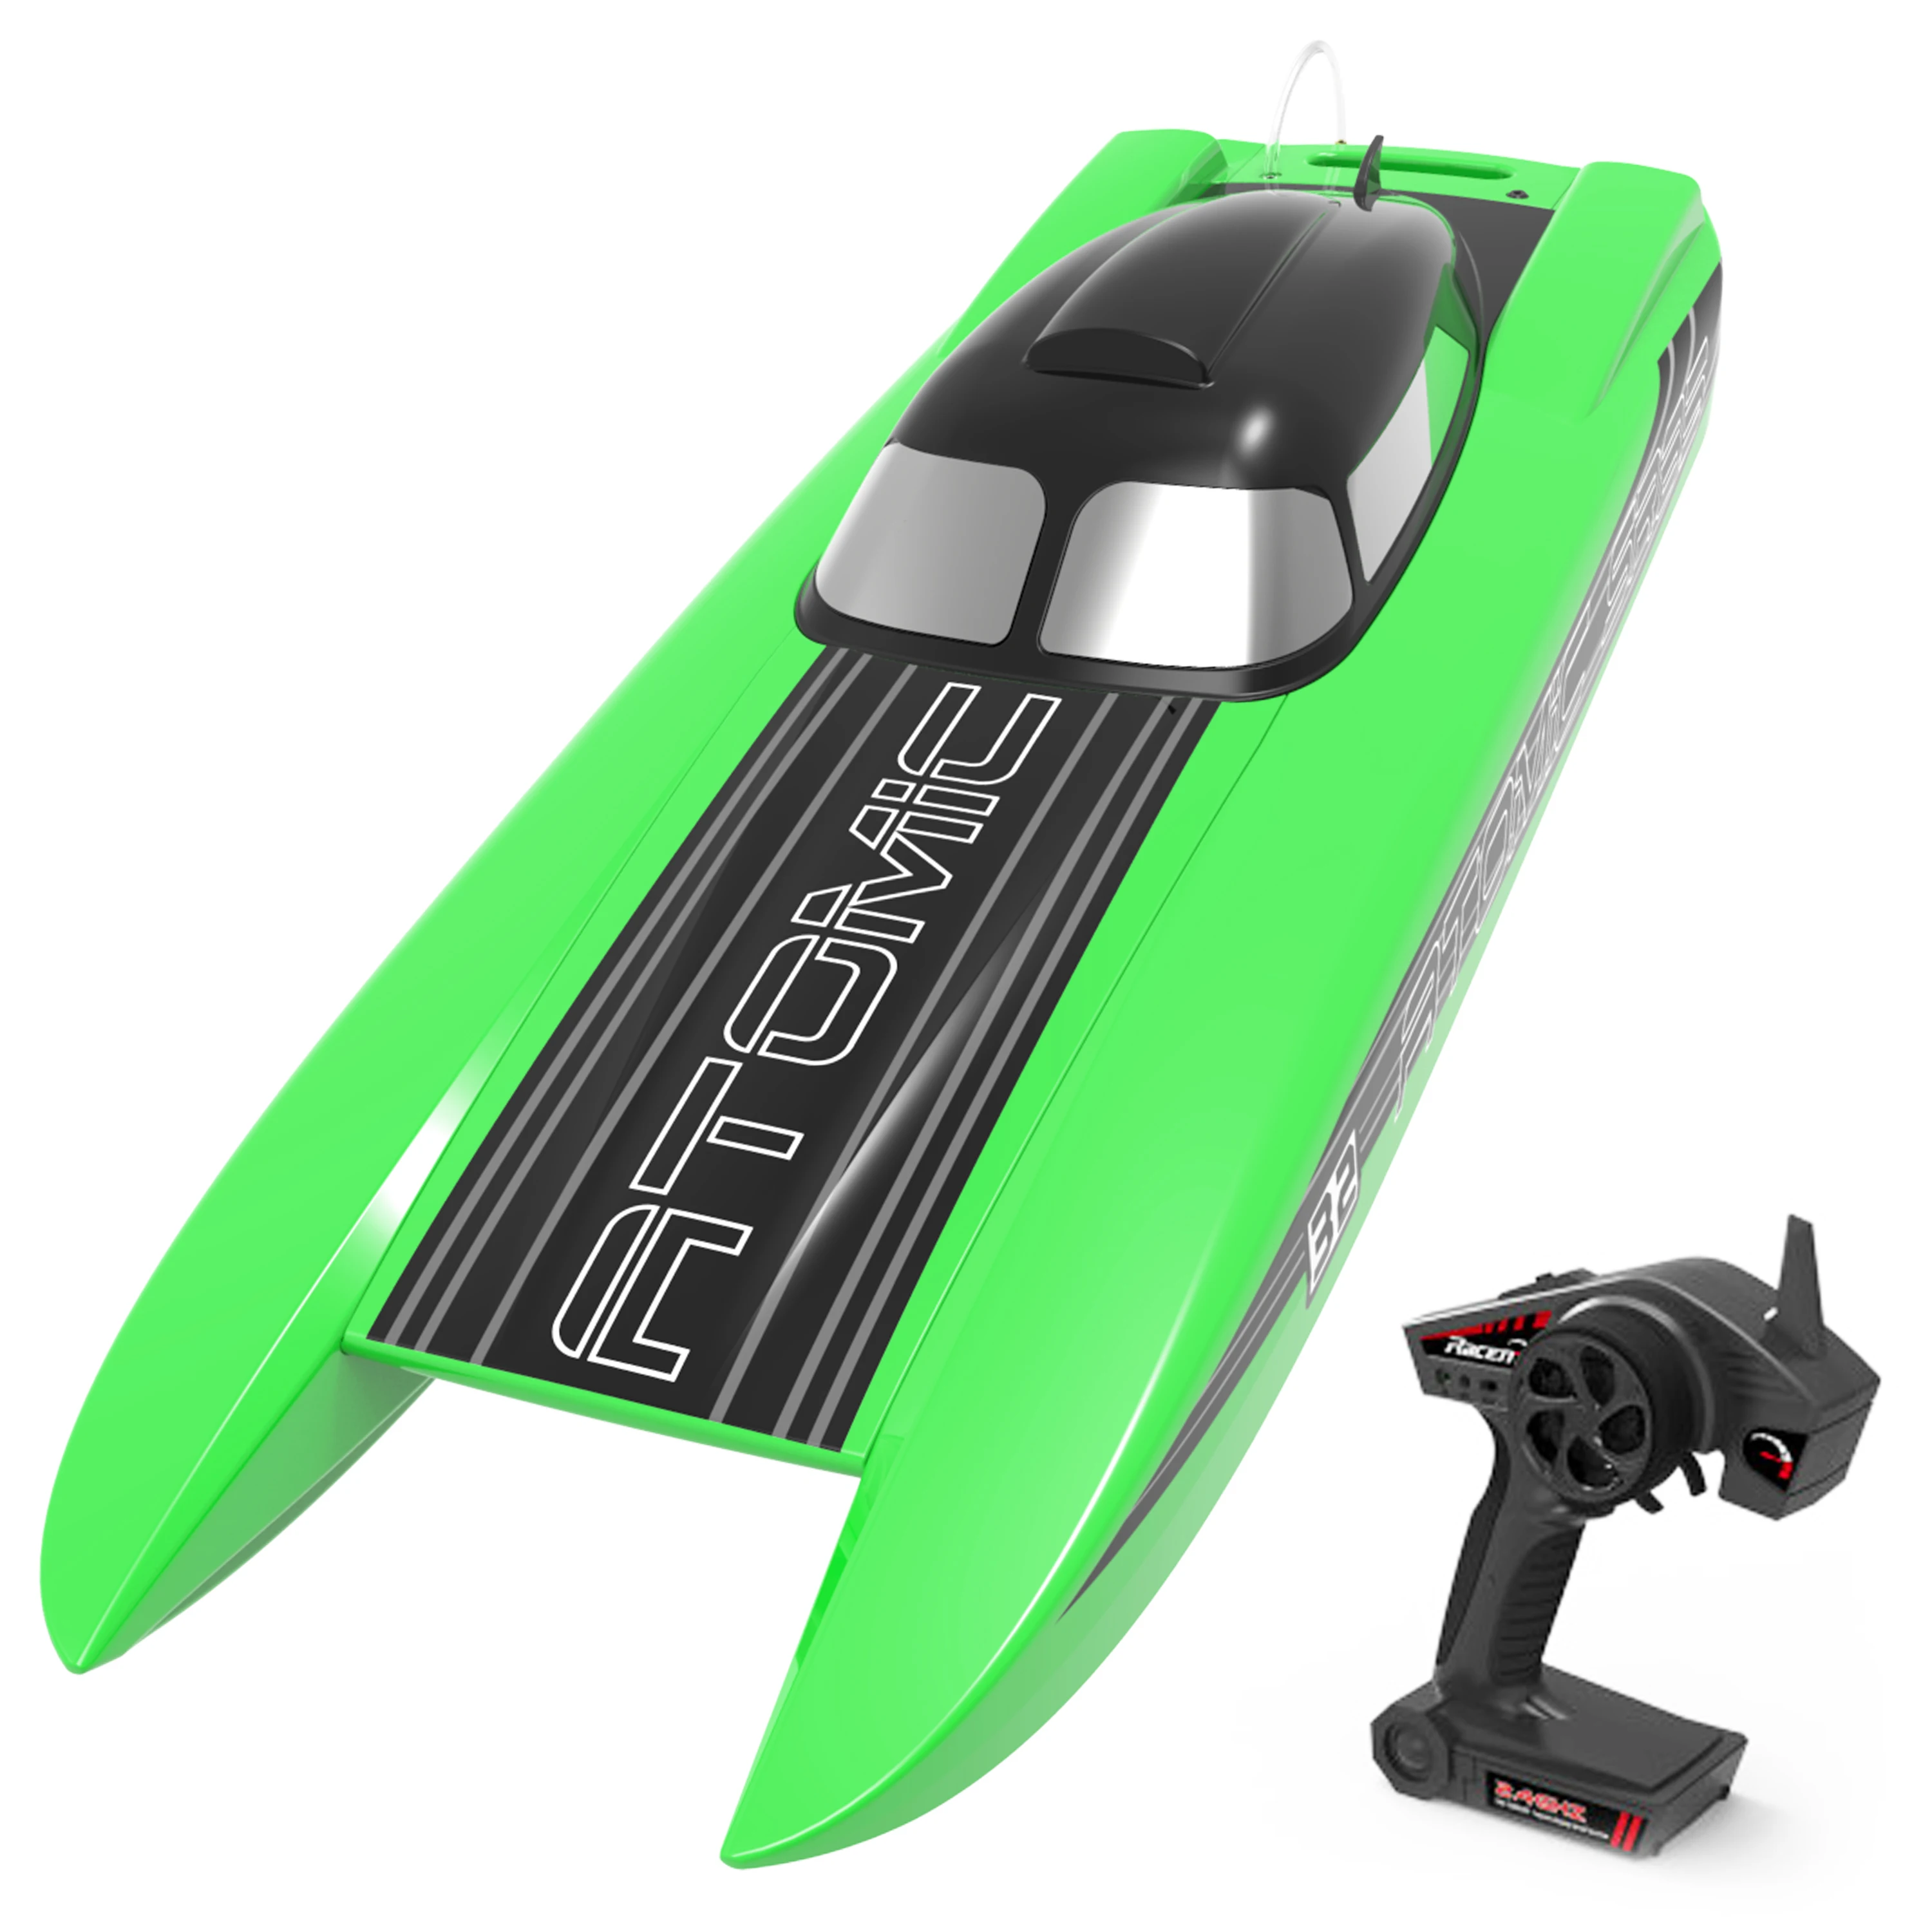 super fast rc boats for sale